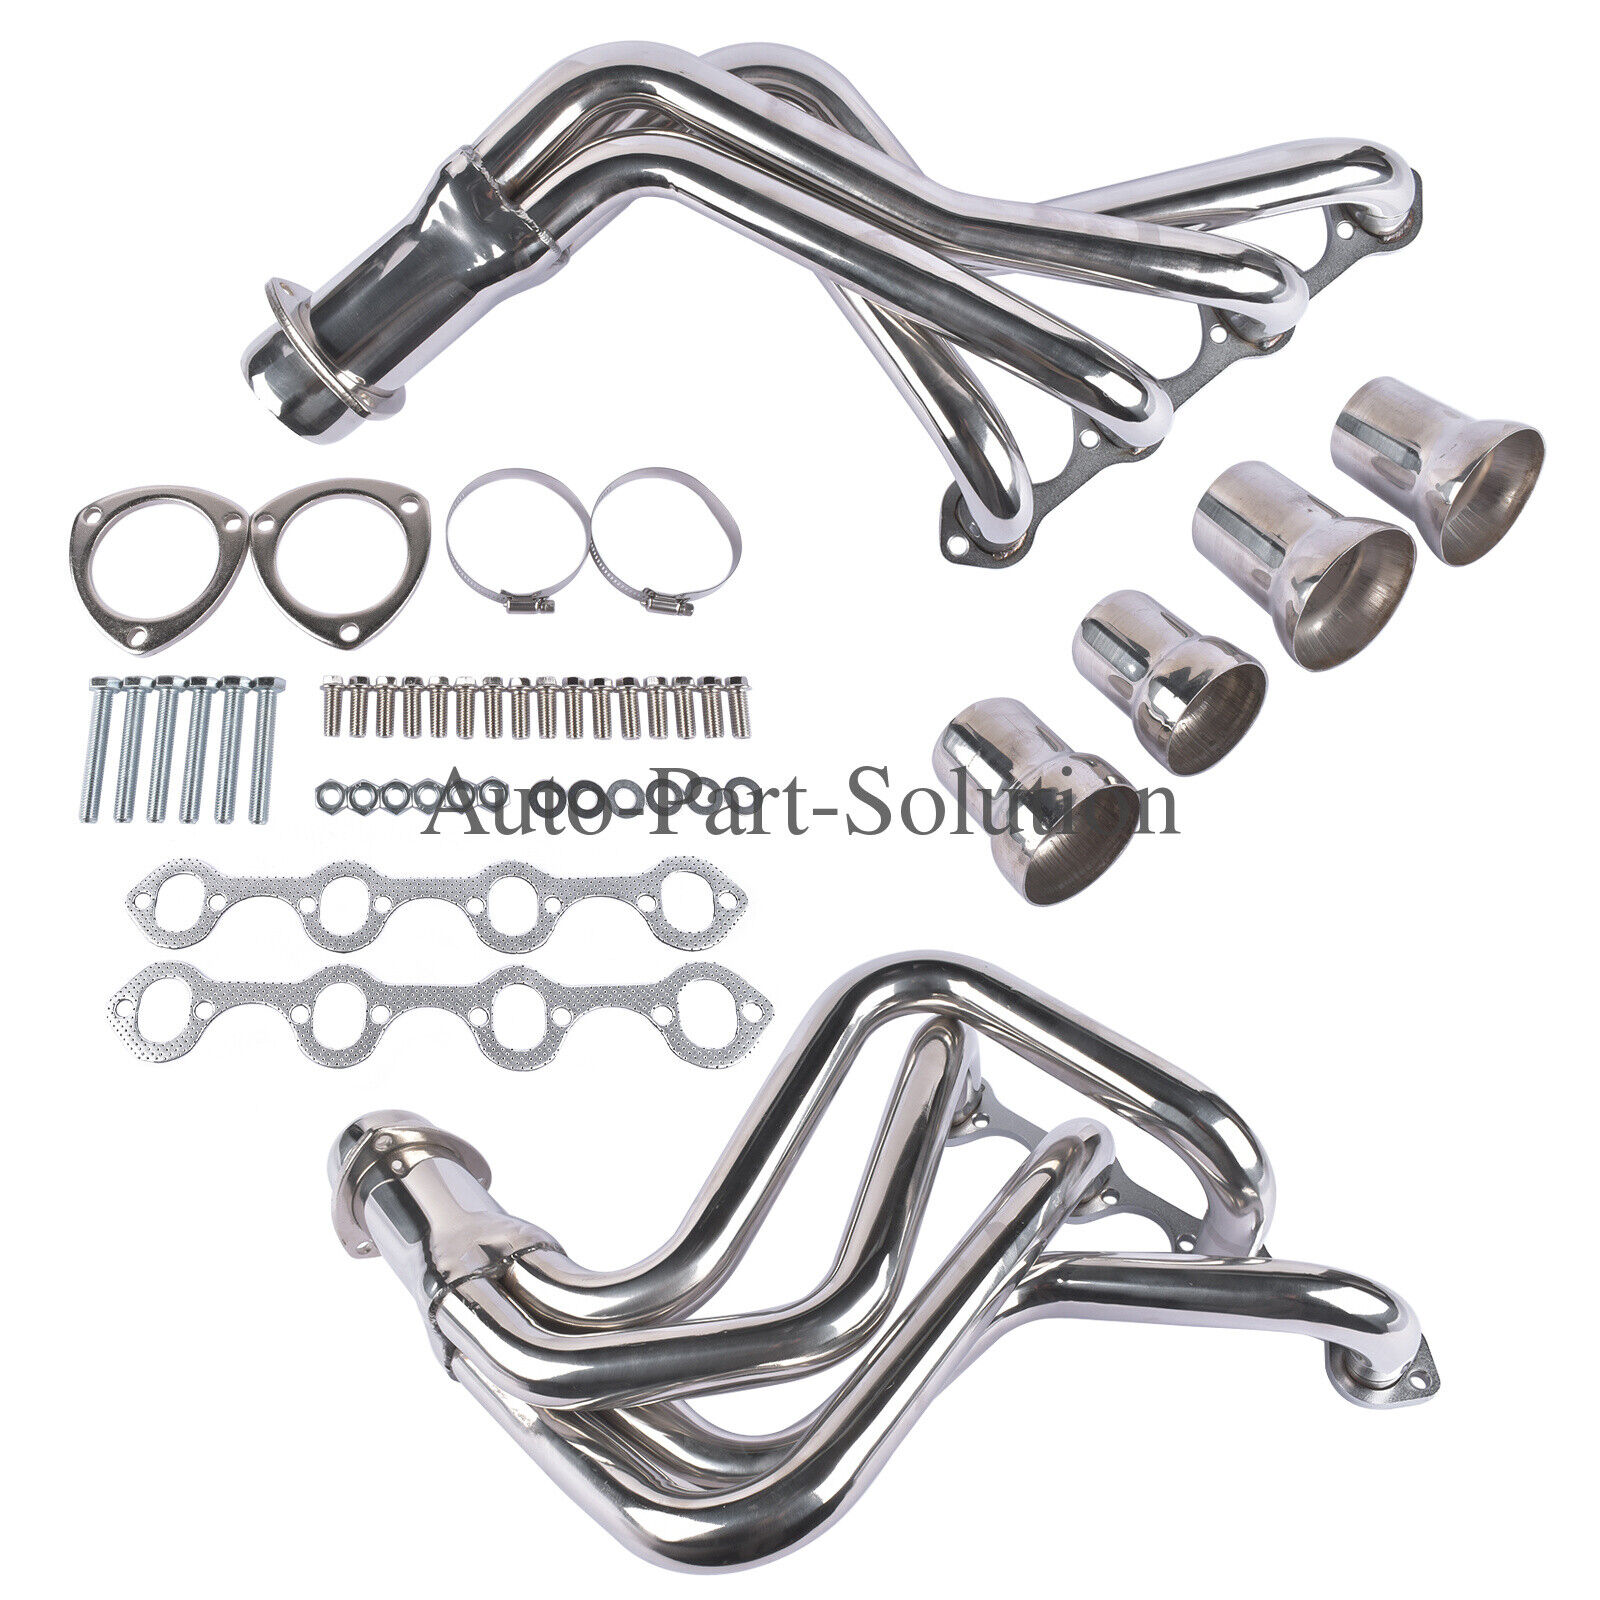 Stainless Steel Exhaust Manifold Headers for Ford F-100 1969-1979 5.0L RWD 302